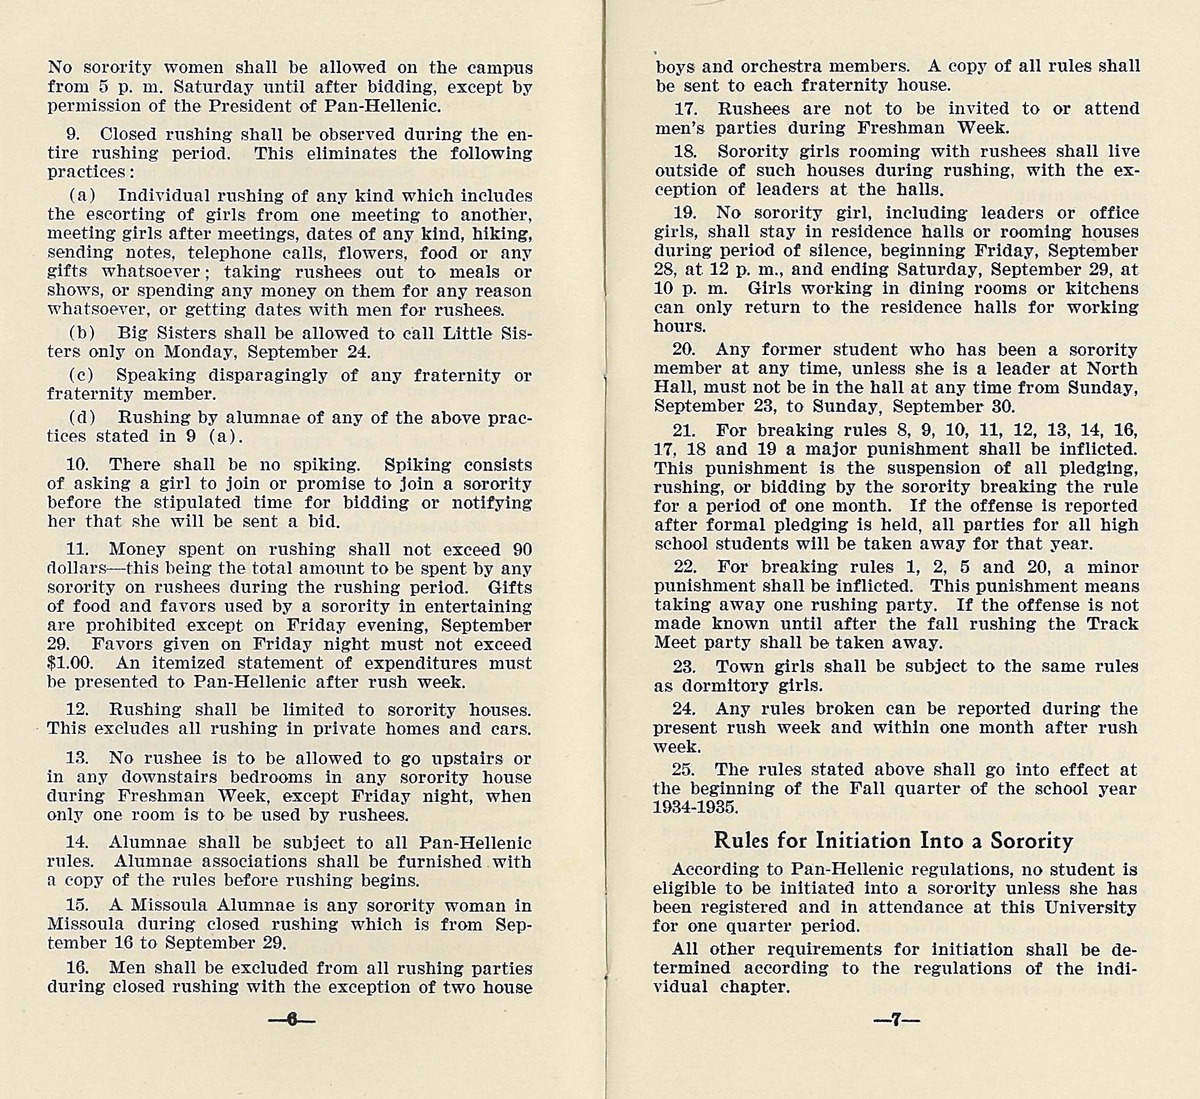 1934 page 6 and 7.jpg